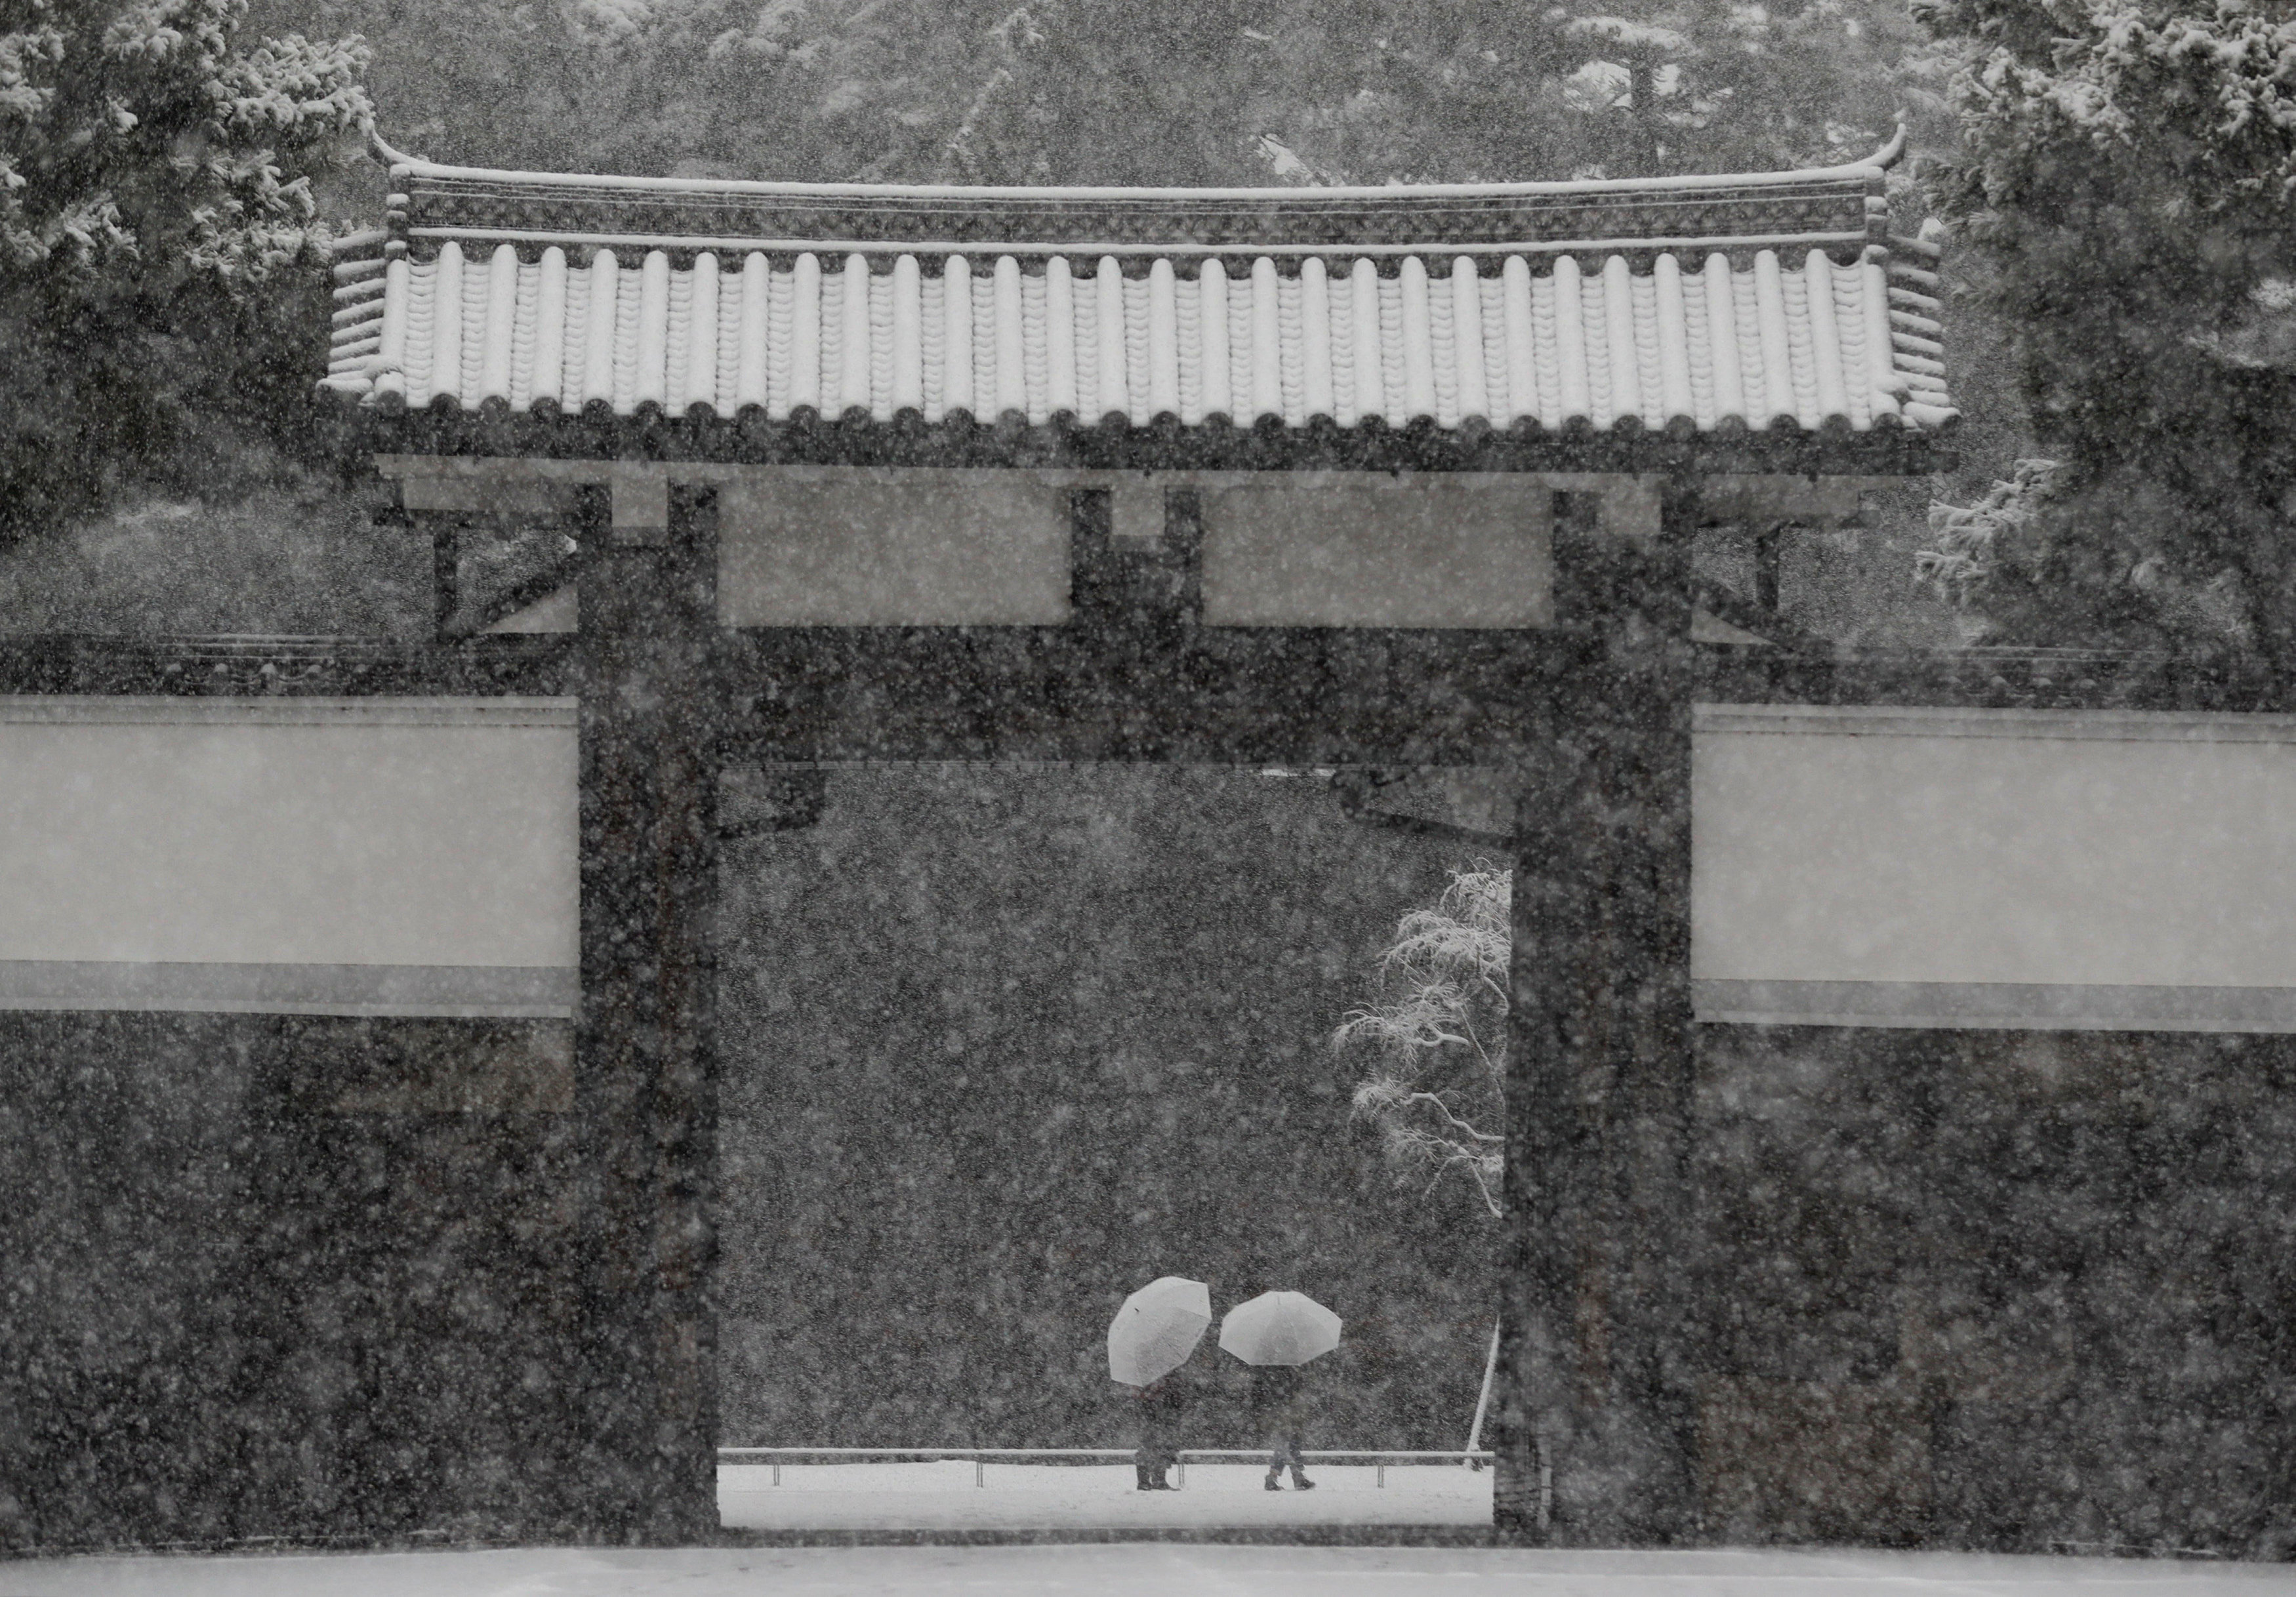 In pictures: Snowstorm hits Tokyo